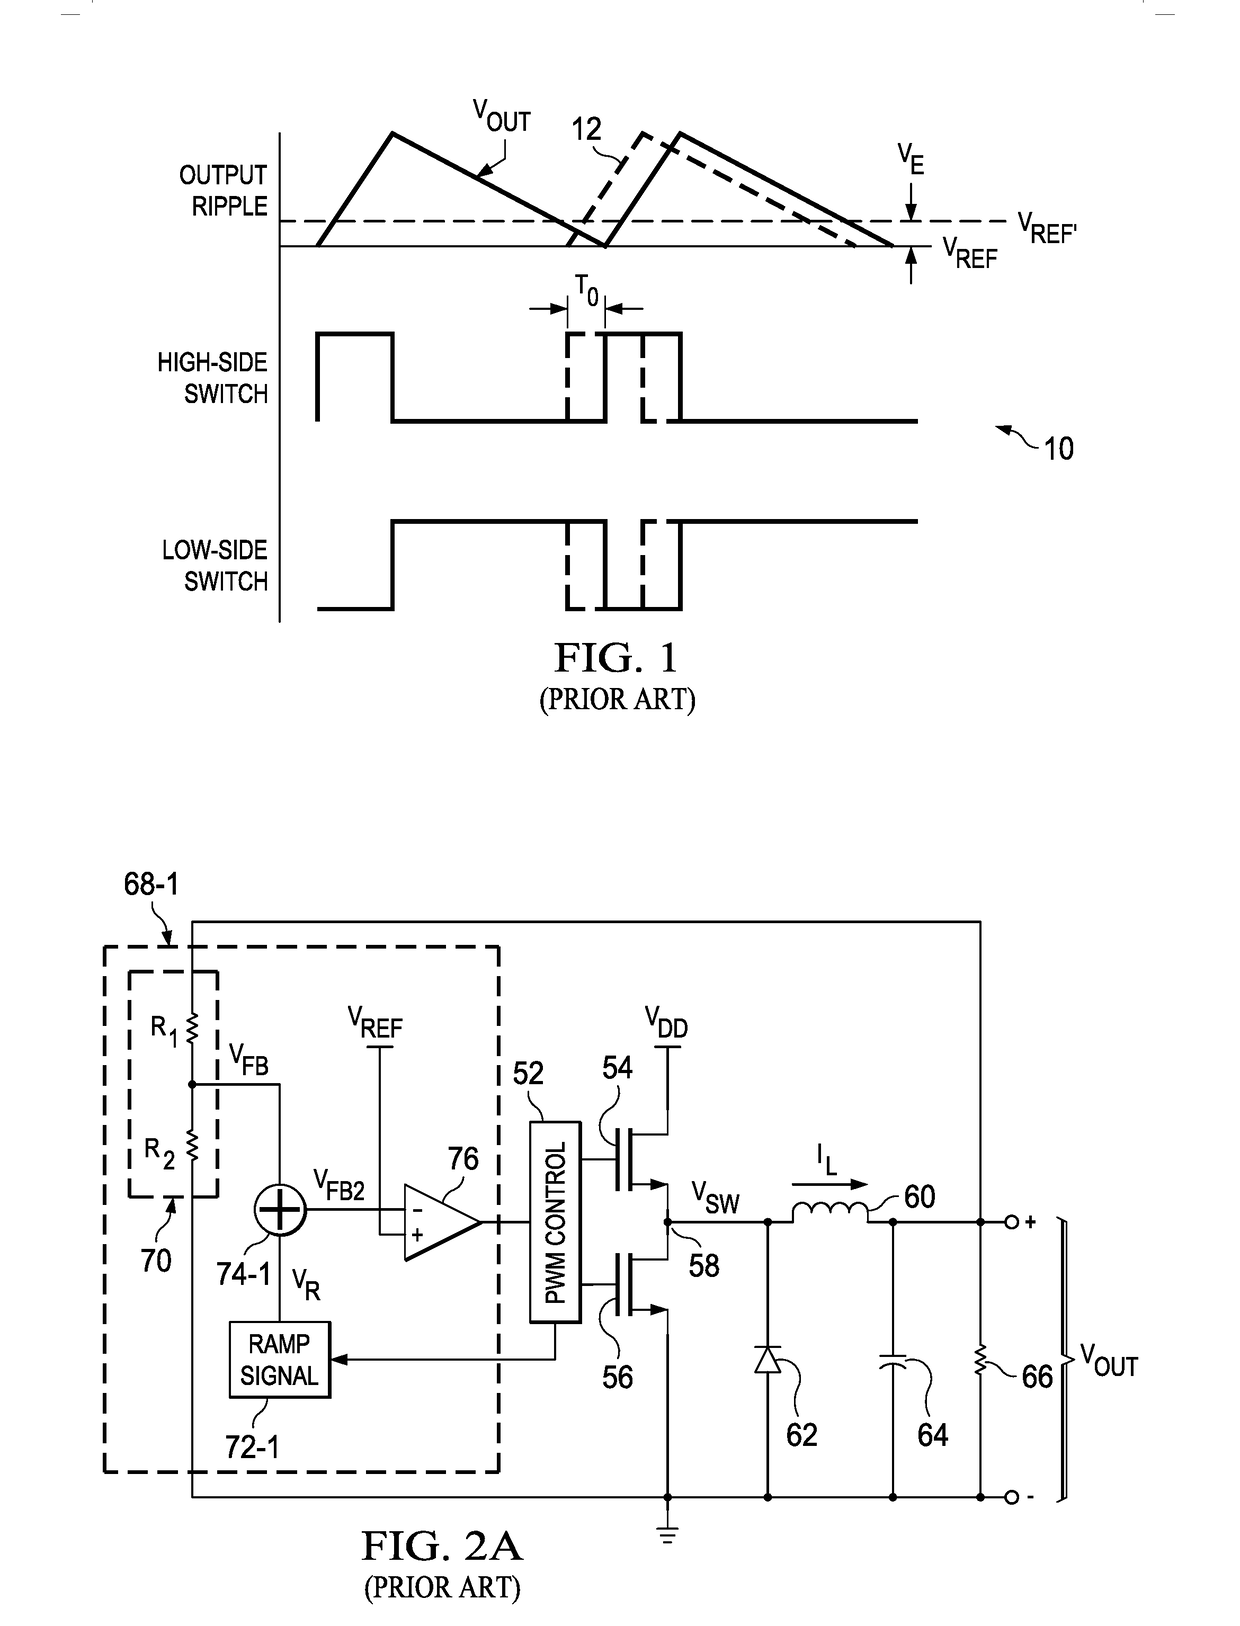 Advanced Control Circuit for Switched-Mode DC-DC Converter